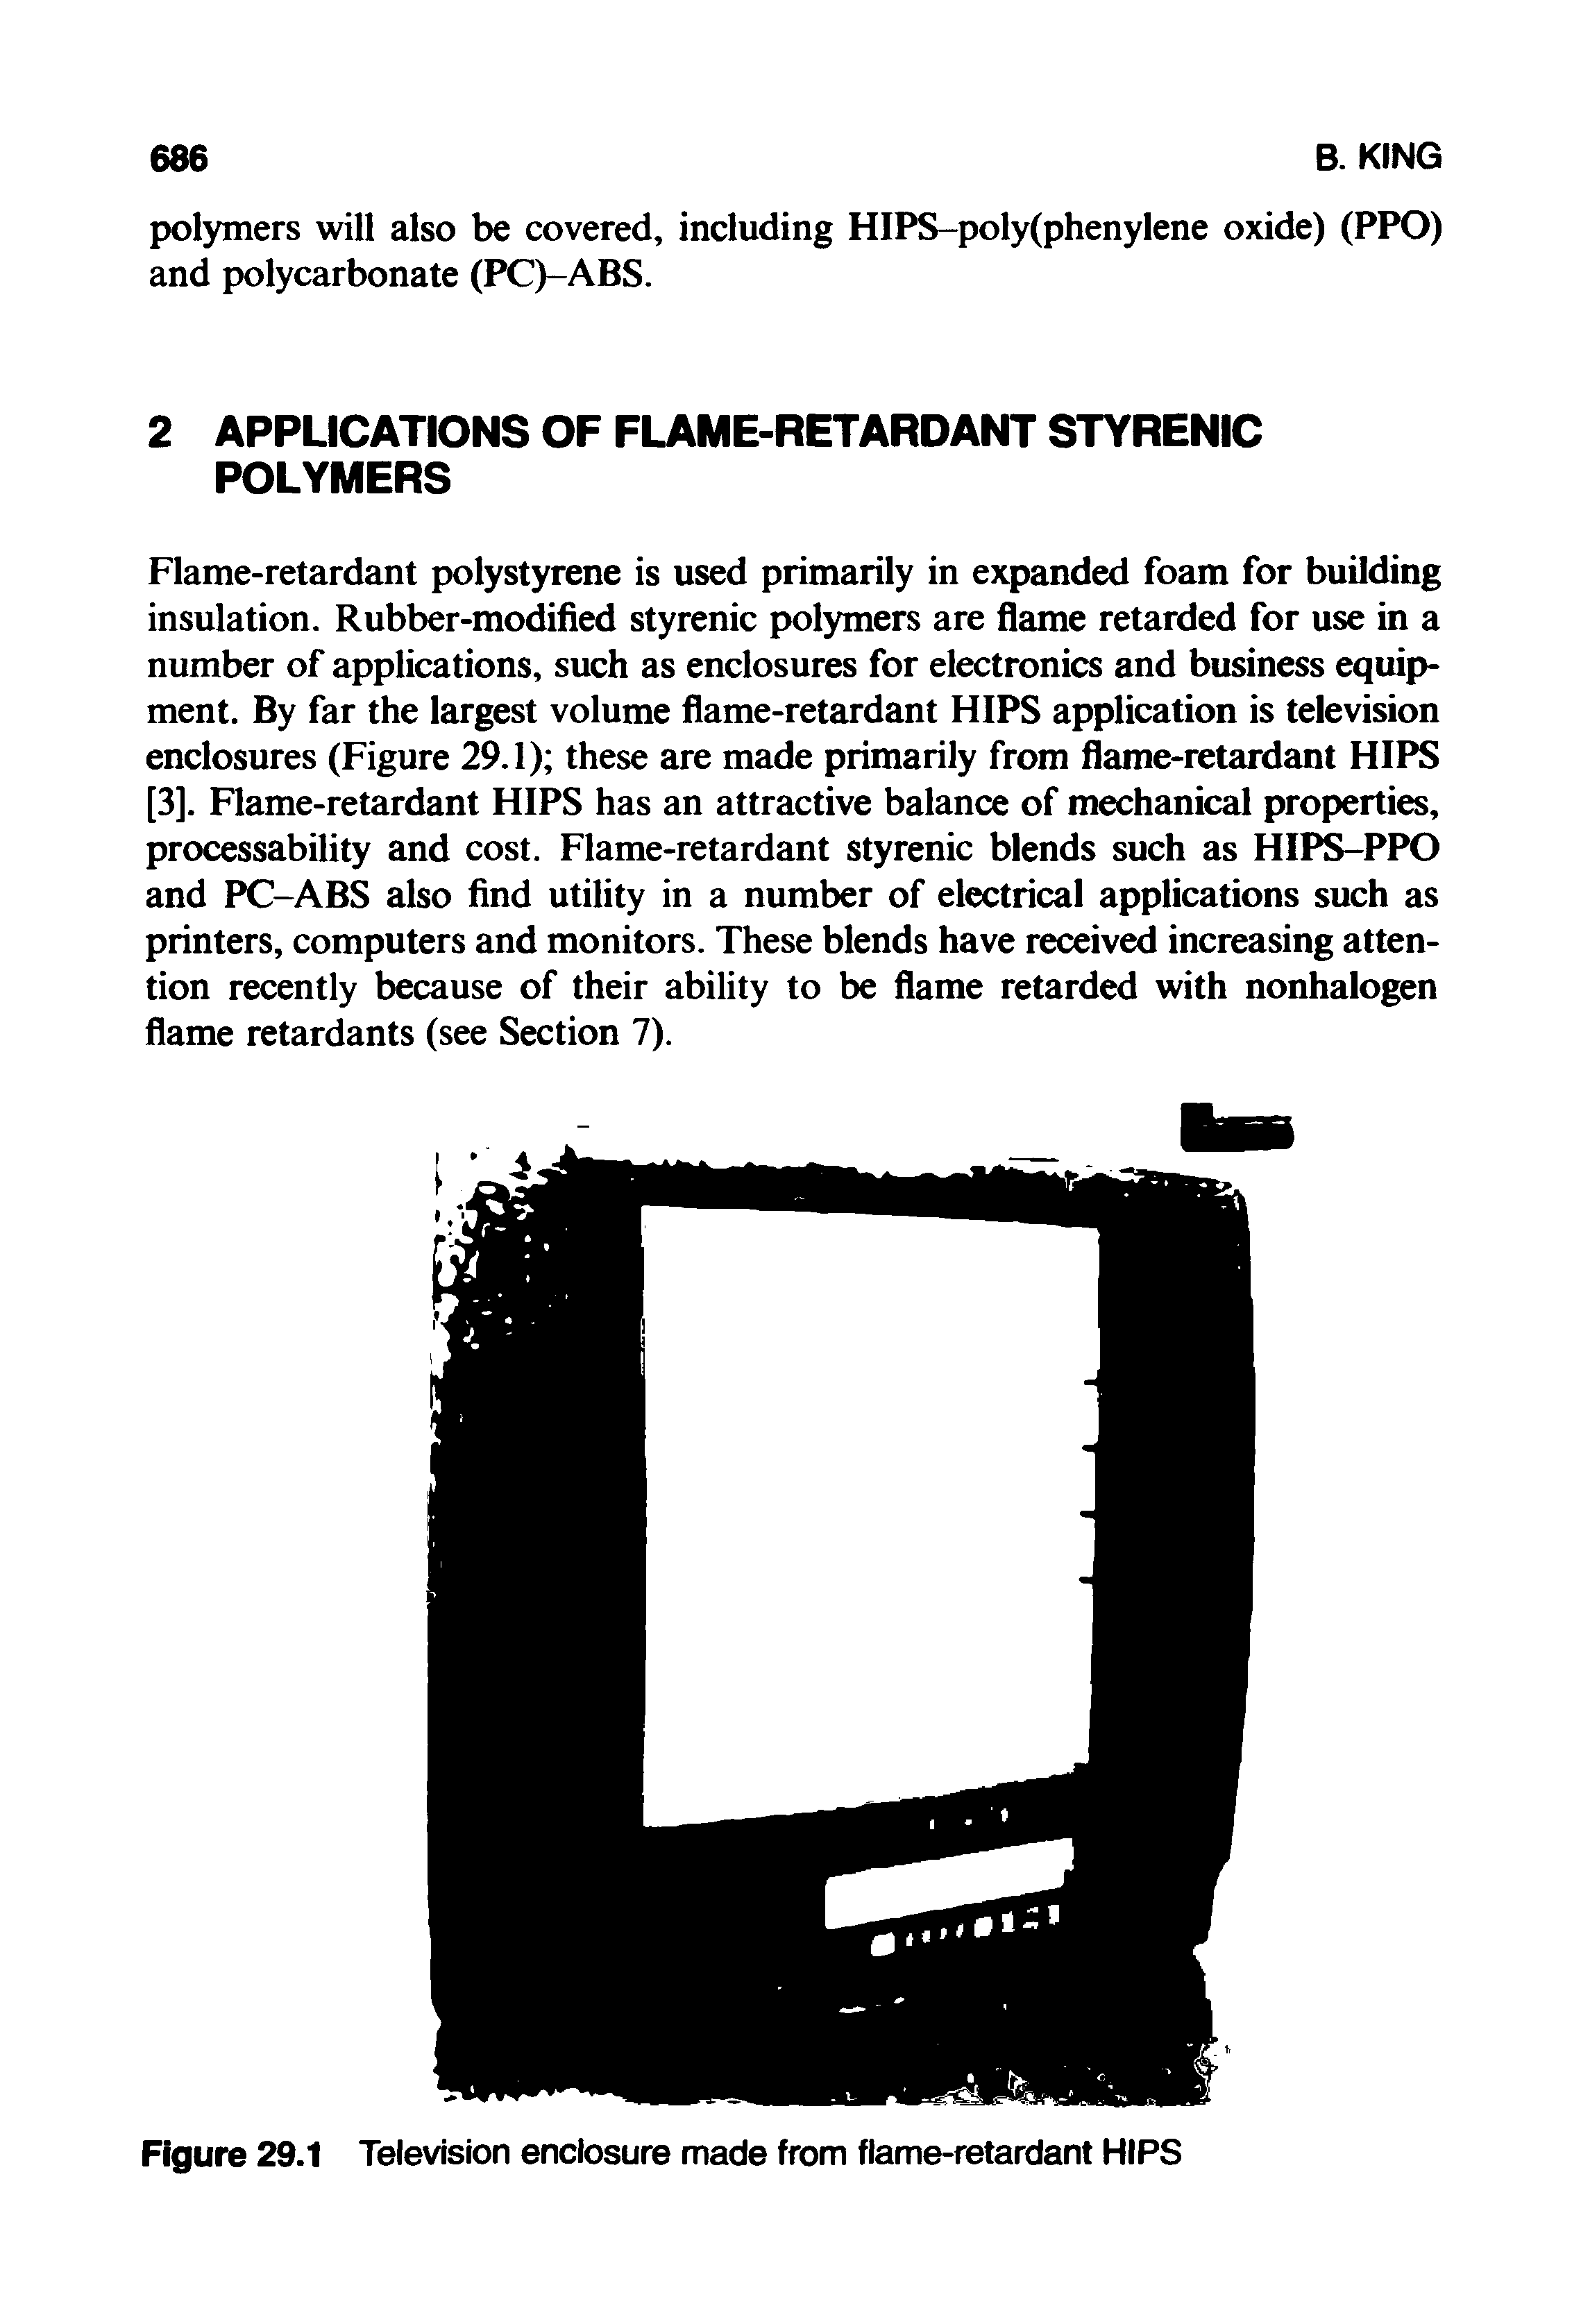 Figure 29.1 Television enclosure made from flame-retardant HIPS...